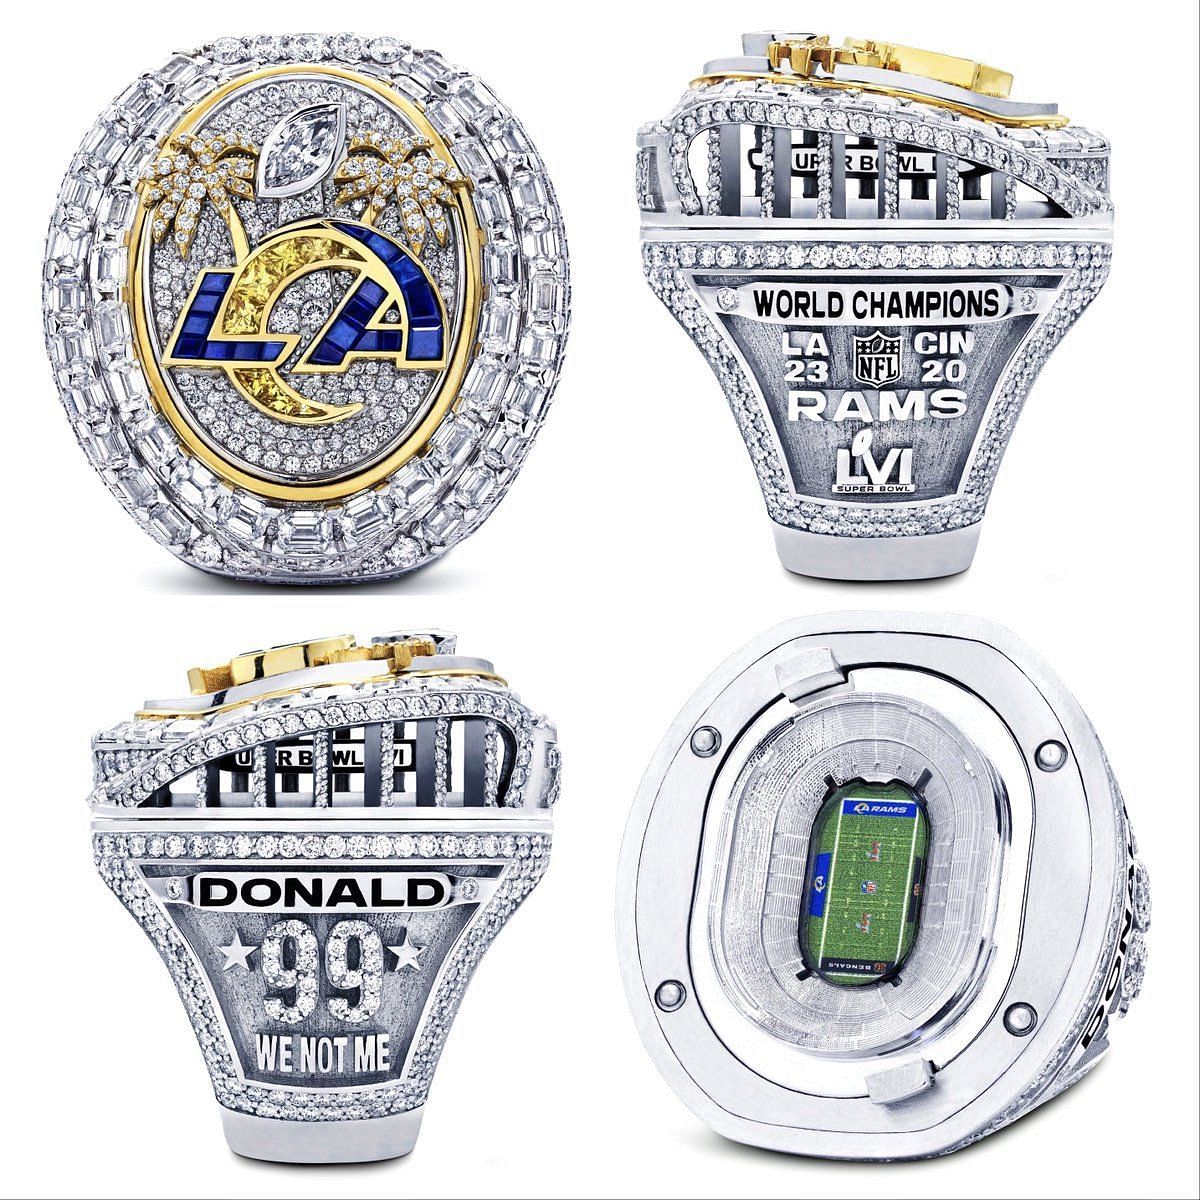 Los Angeles Rams Super Bowl 56 ring. Source: Twitter